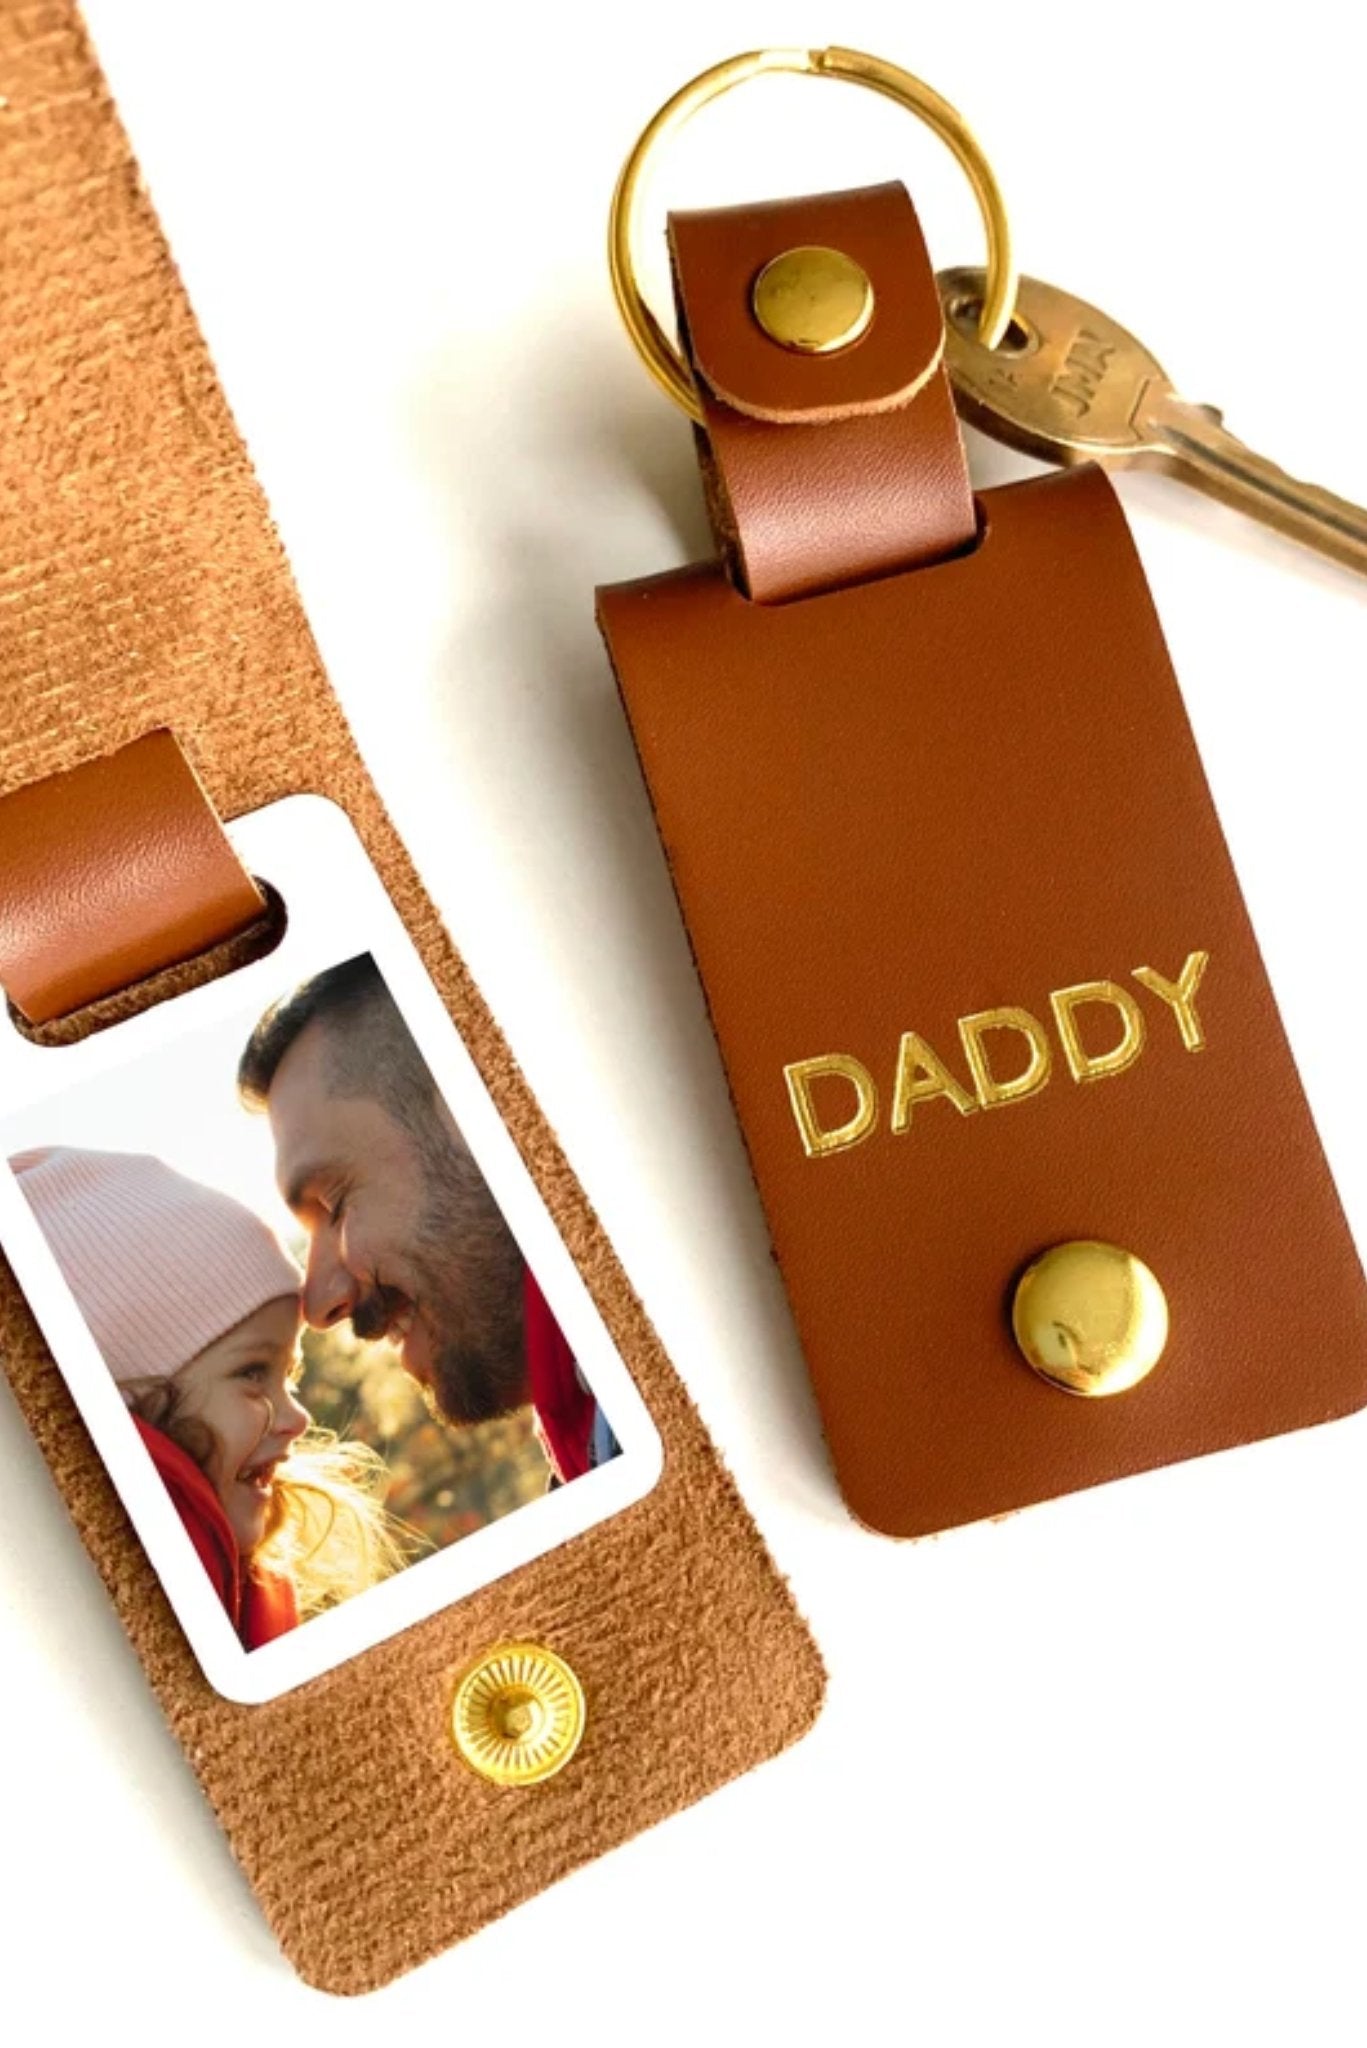 30 Best DIY Gifts for Dads in 2020